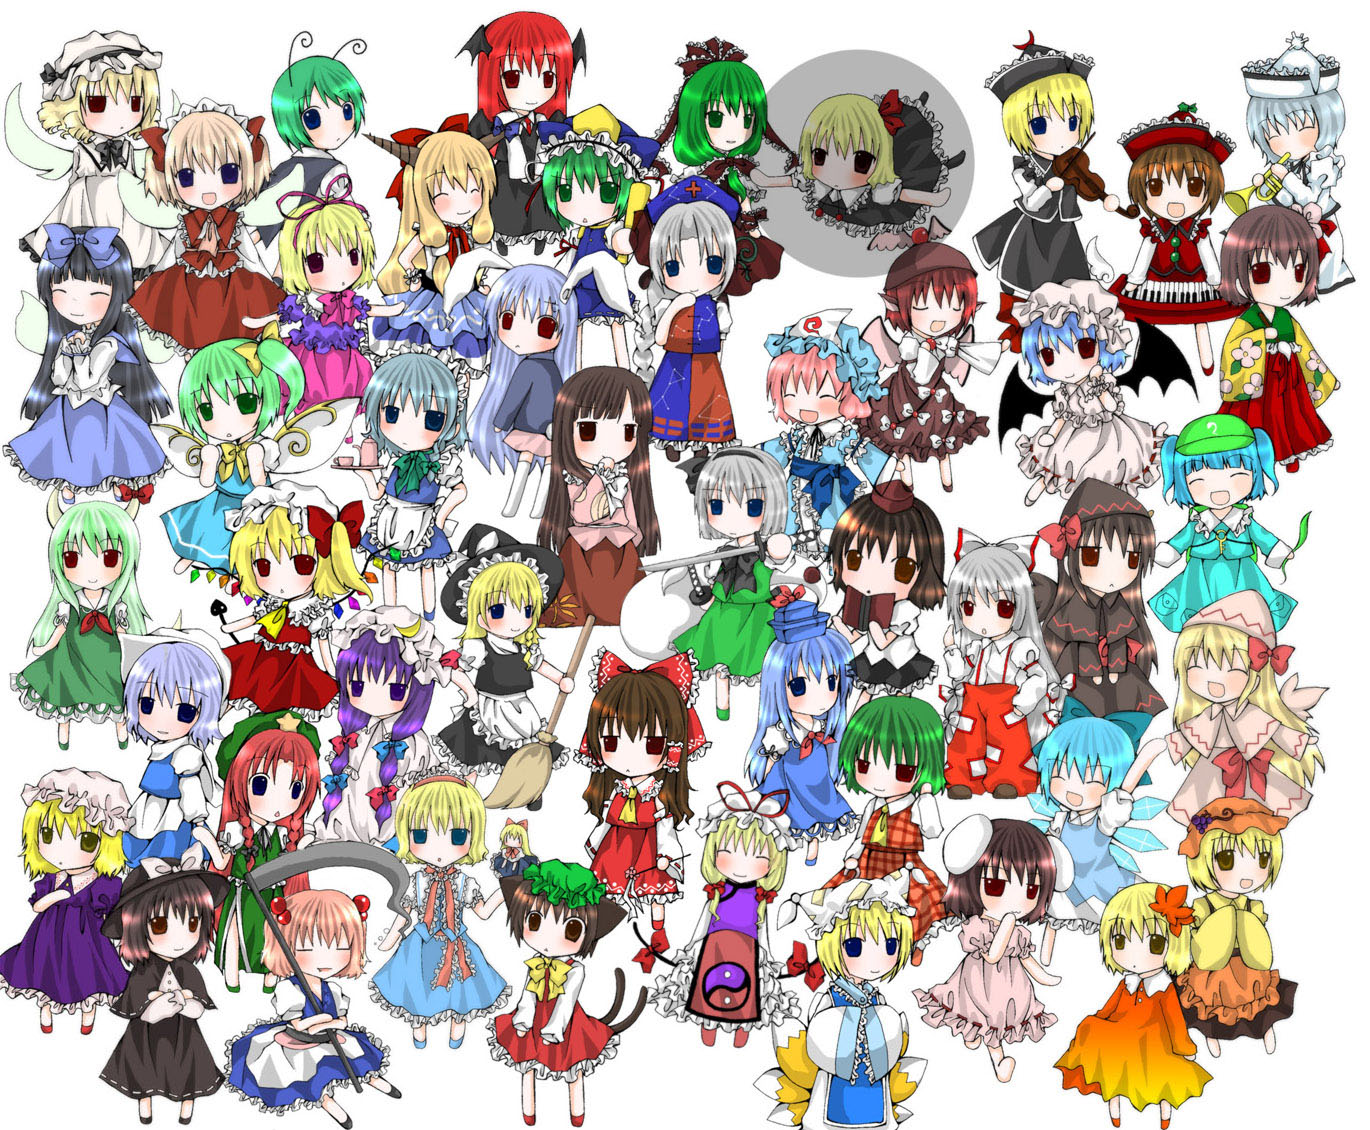 A colorful collage featuring various characters from the Touhou series.